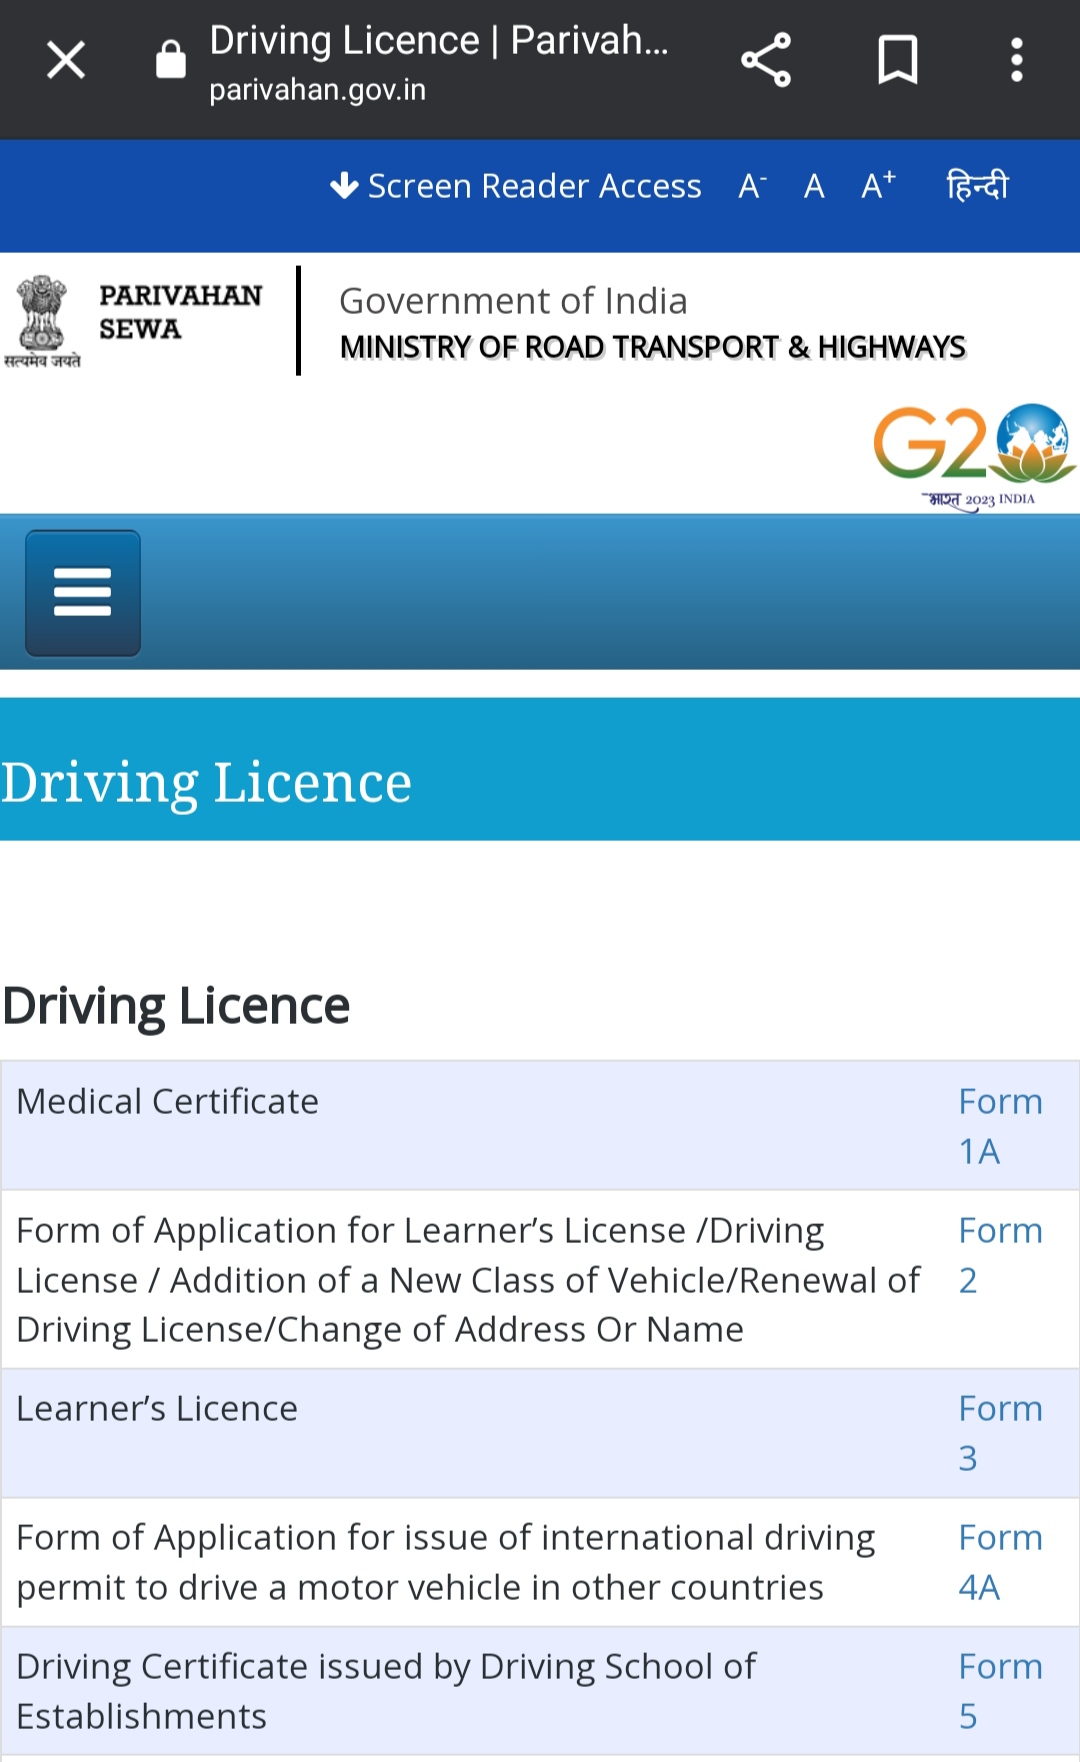 Driving Licence Update Image Badlao